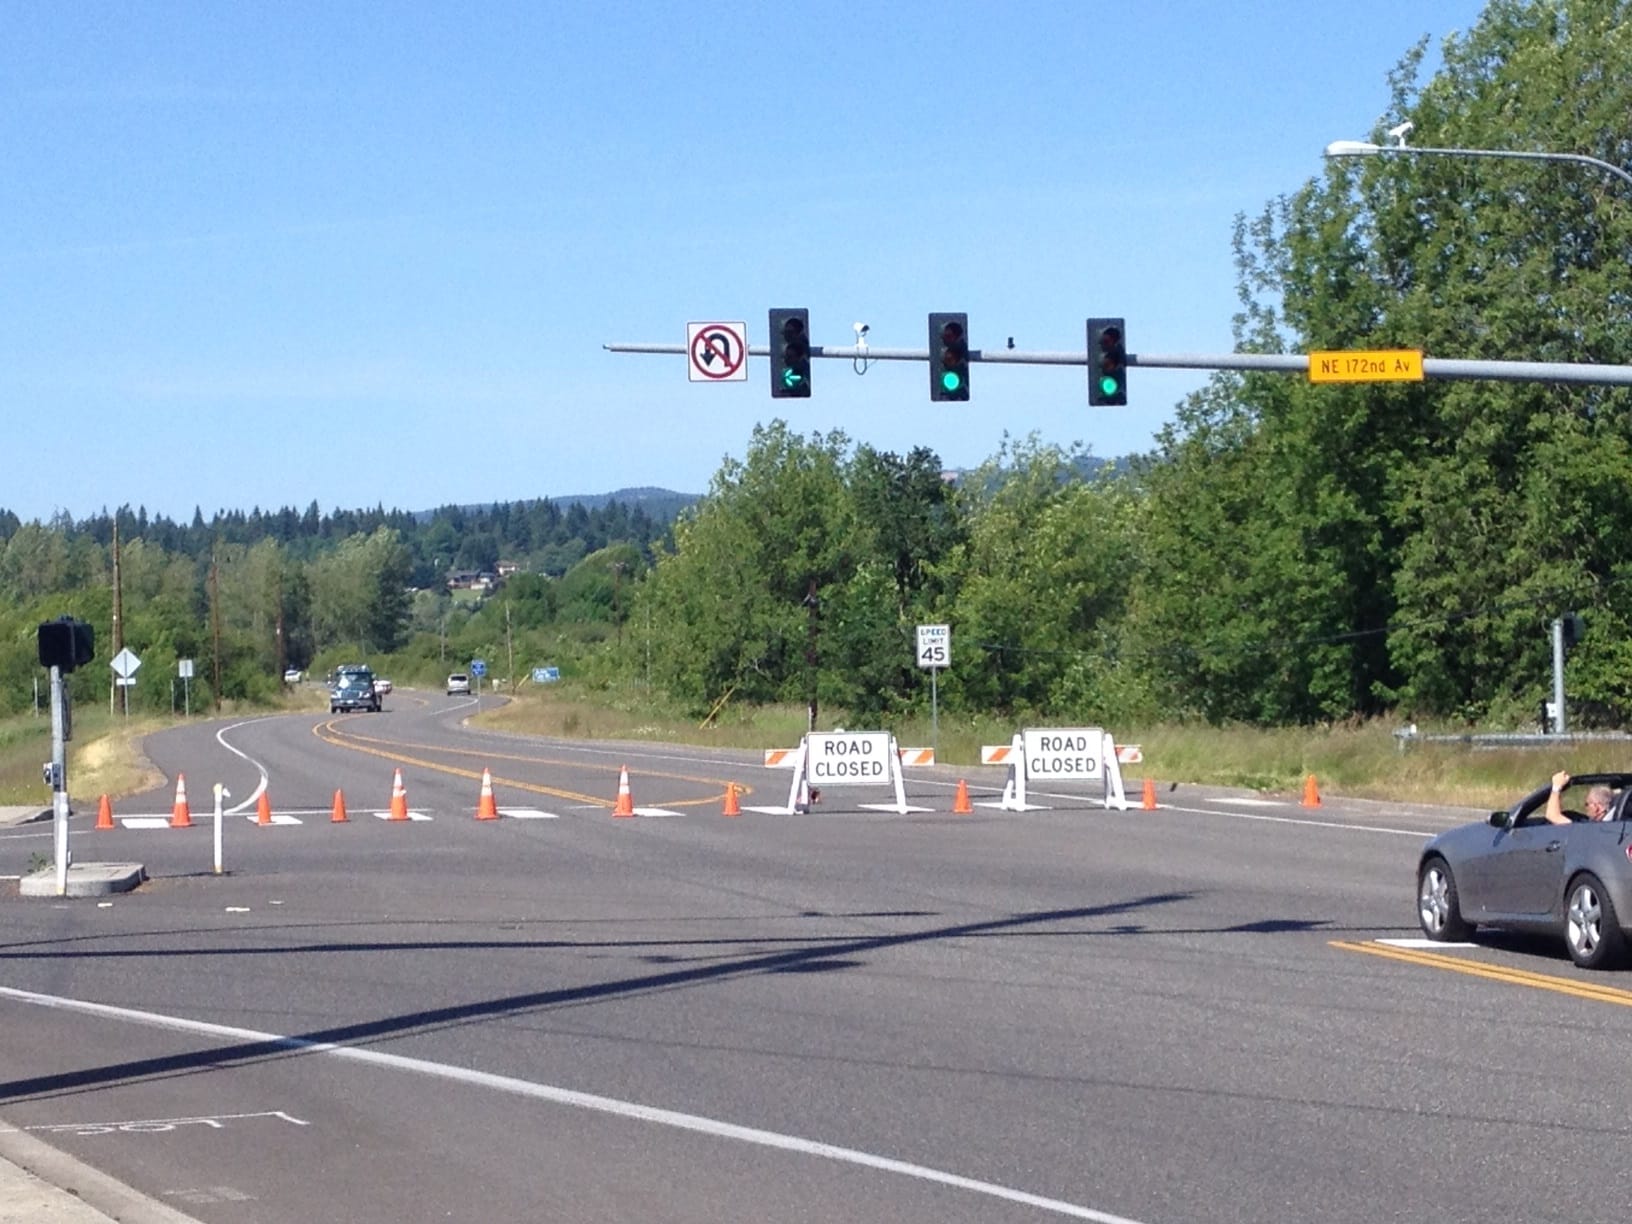 Traffic detectives shut down Ward Road for about three hours while they investigated a serious crash that happened on the road in Hockinson.